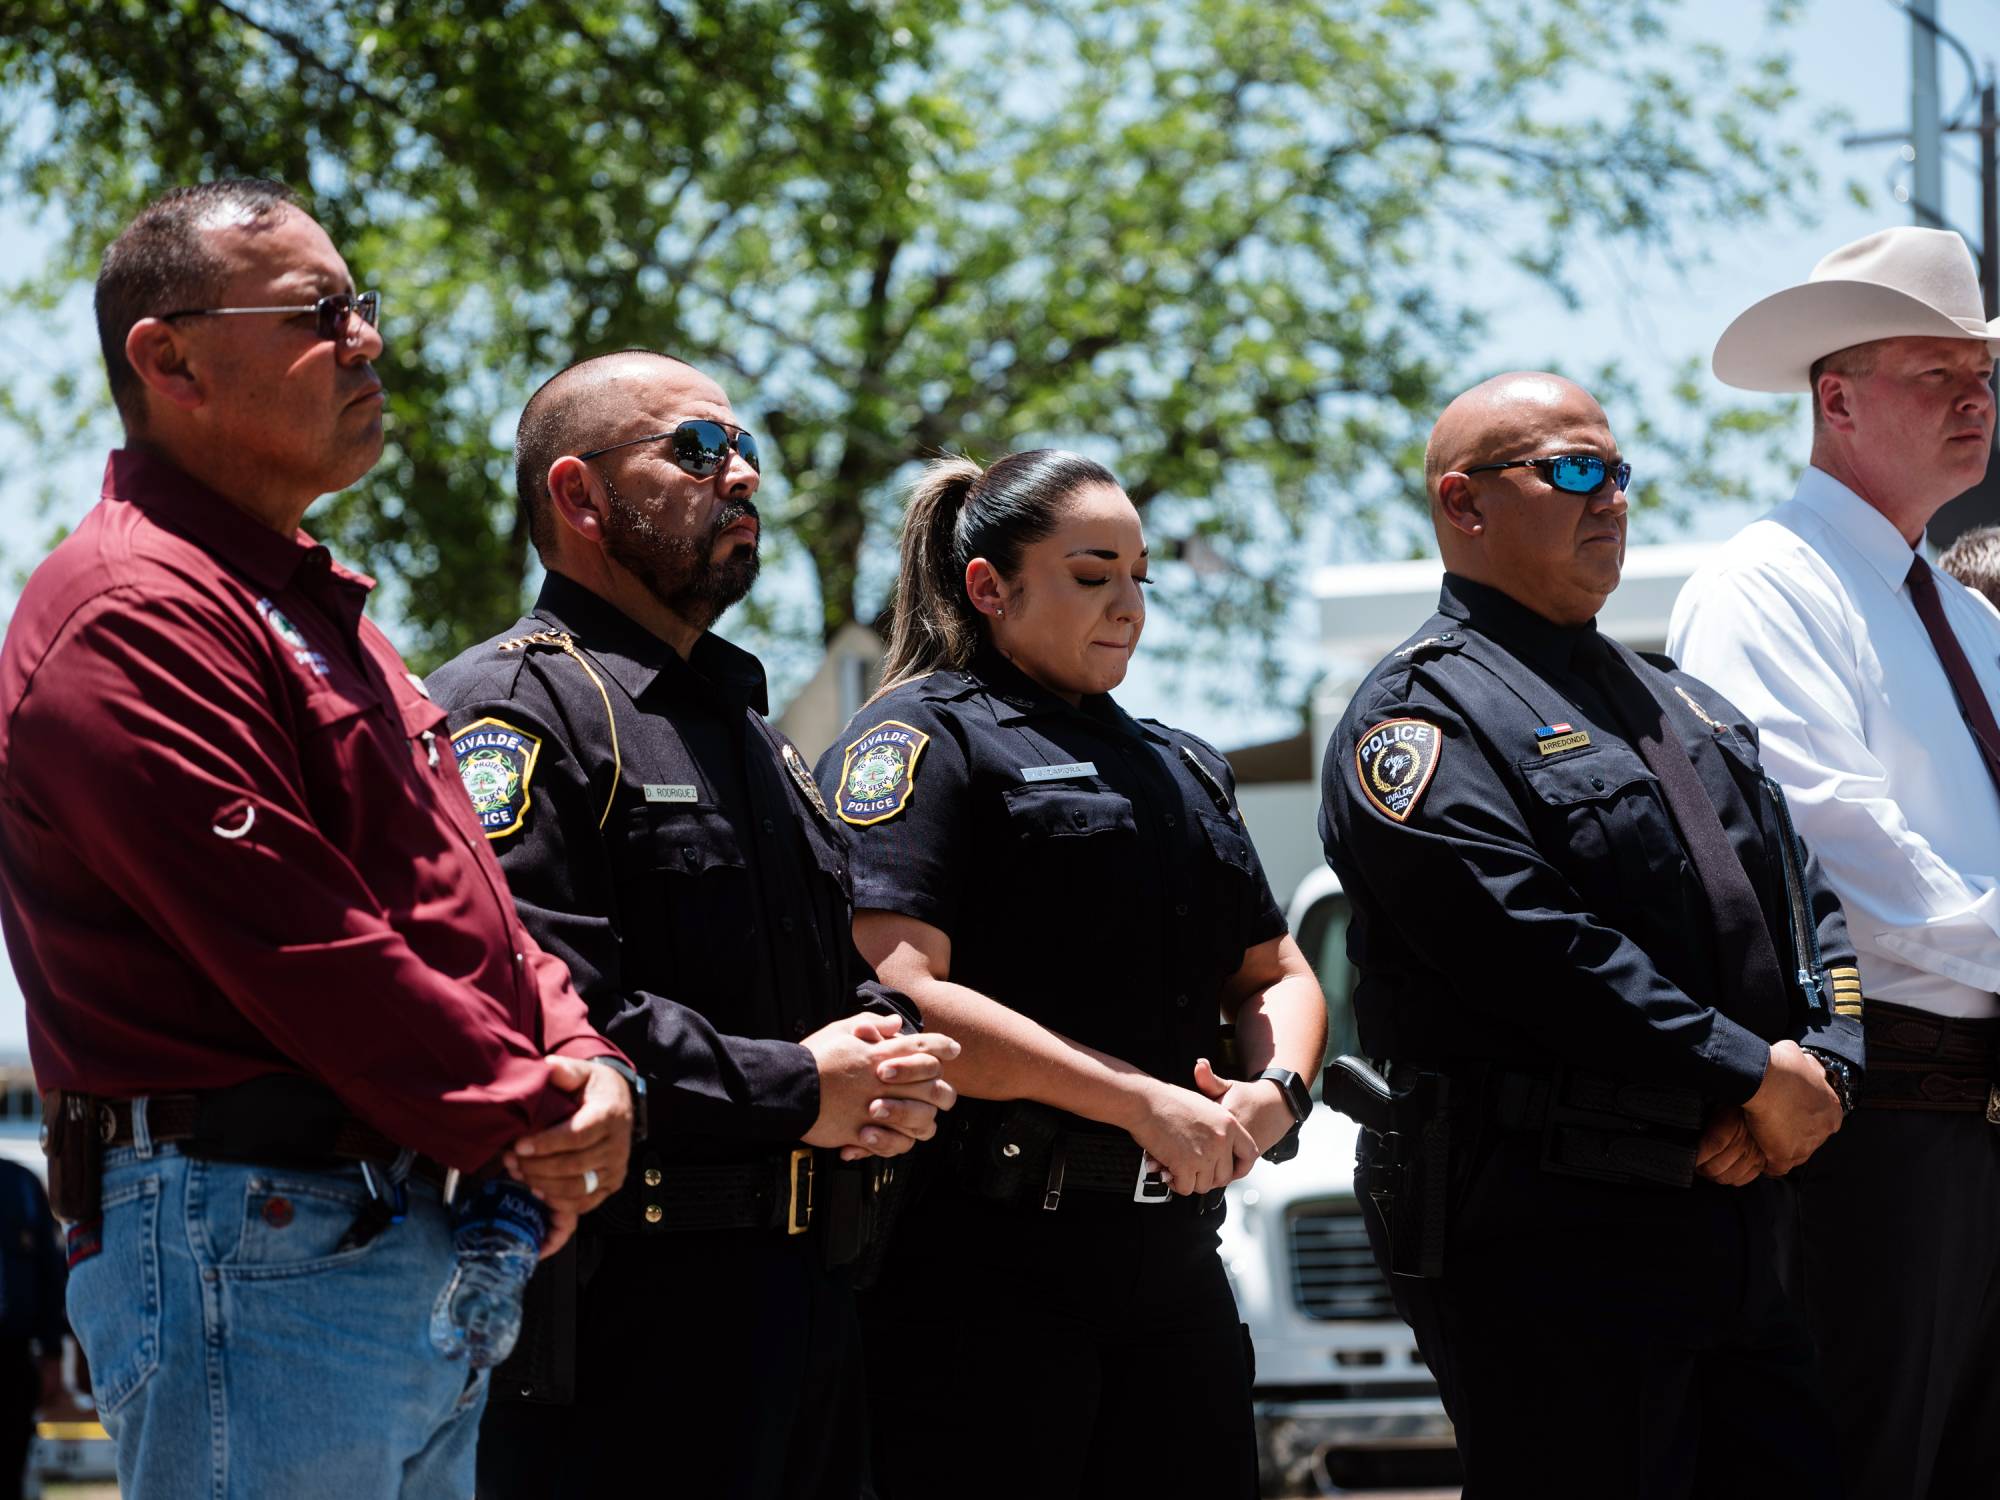 Chief Pete Arredondo (second from right) at a news conference in Uvalde, Texas, on May 26. Arredondo, the commander at the scene of the mass shooting at Robb Elementary School, arrived without a police radio, and decided in the first minutes on an approach that would delay a confrontation.  | CHRISTOPHER LEE / THE NEW YORK TIMES